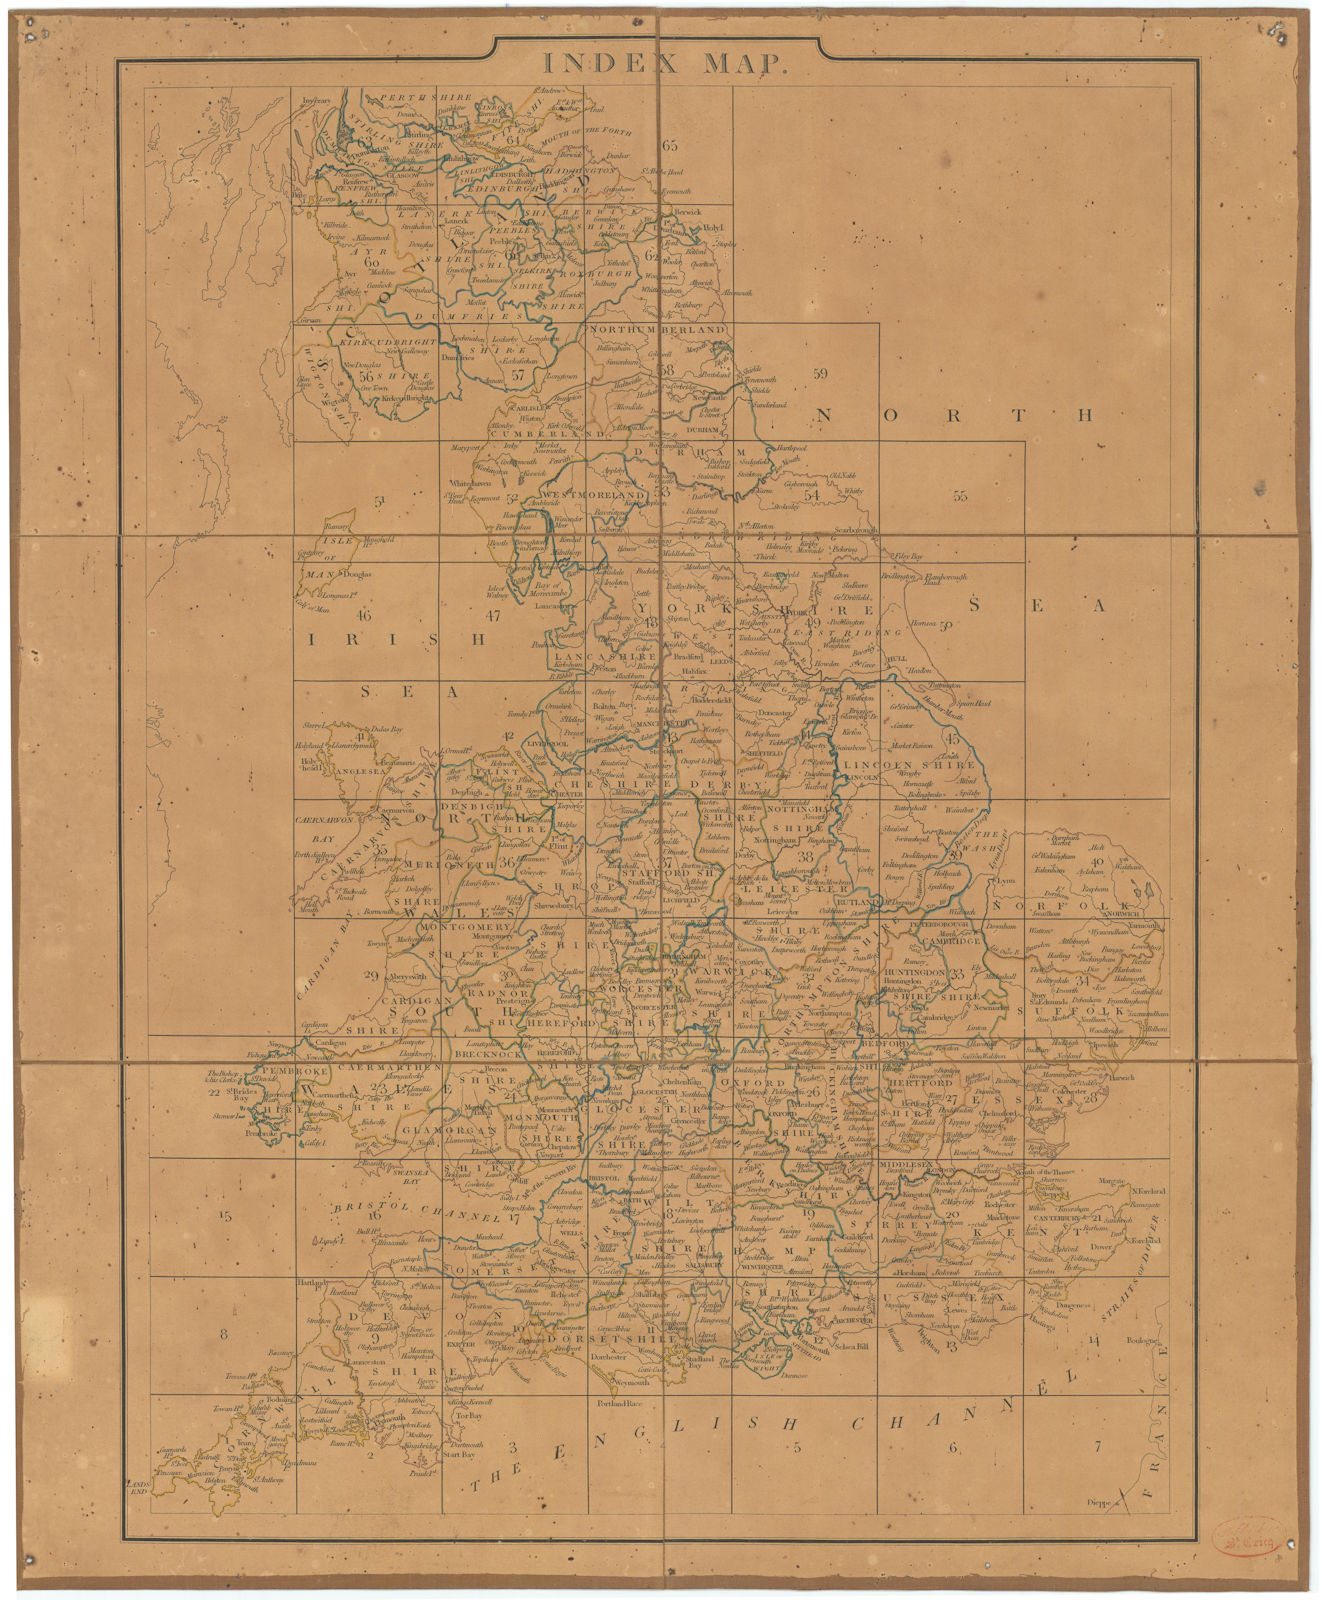 Cary's Improved Map of England and Wales - Index map. G. & J. Cary 1832